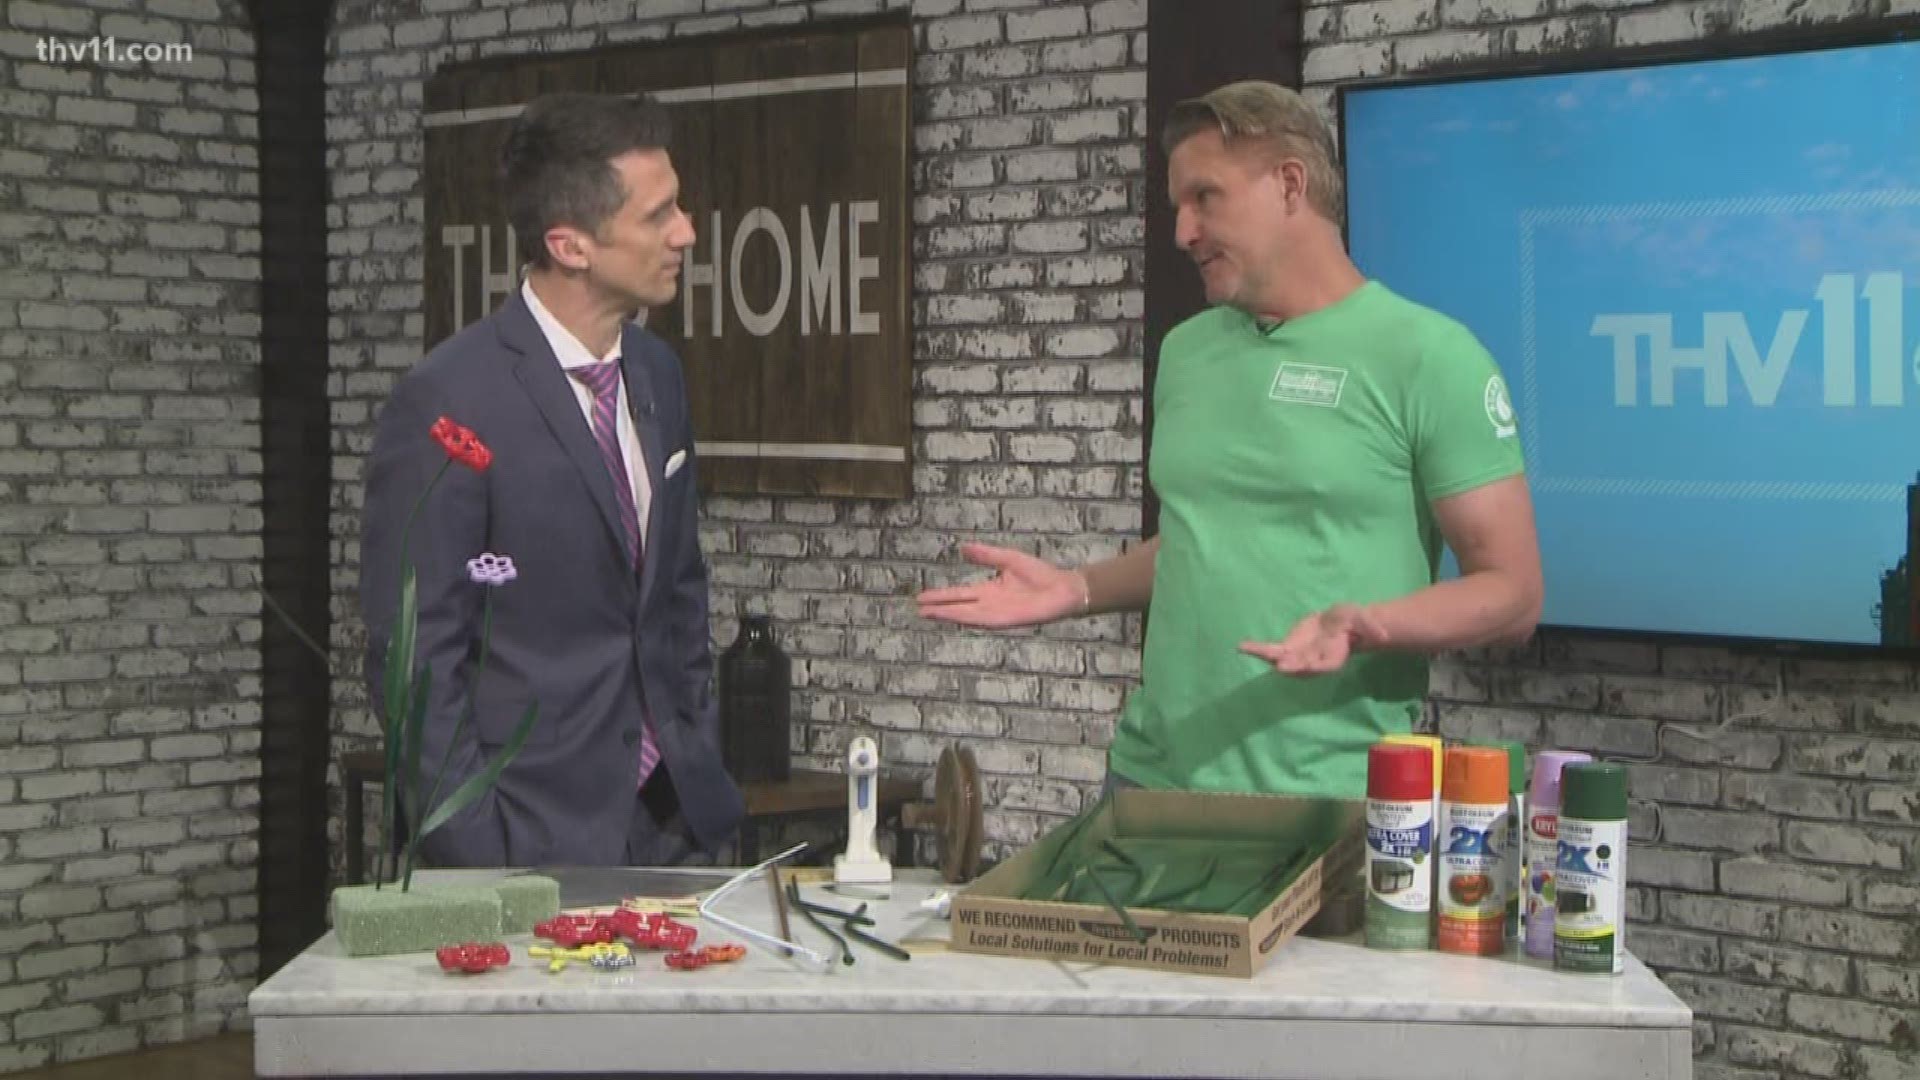 Our number one lifestyle expert Chris H. Olsen is here this morning to talk about flower stakes.